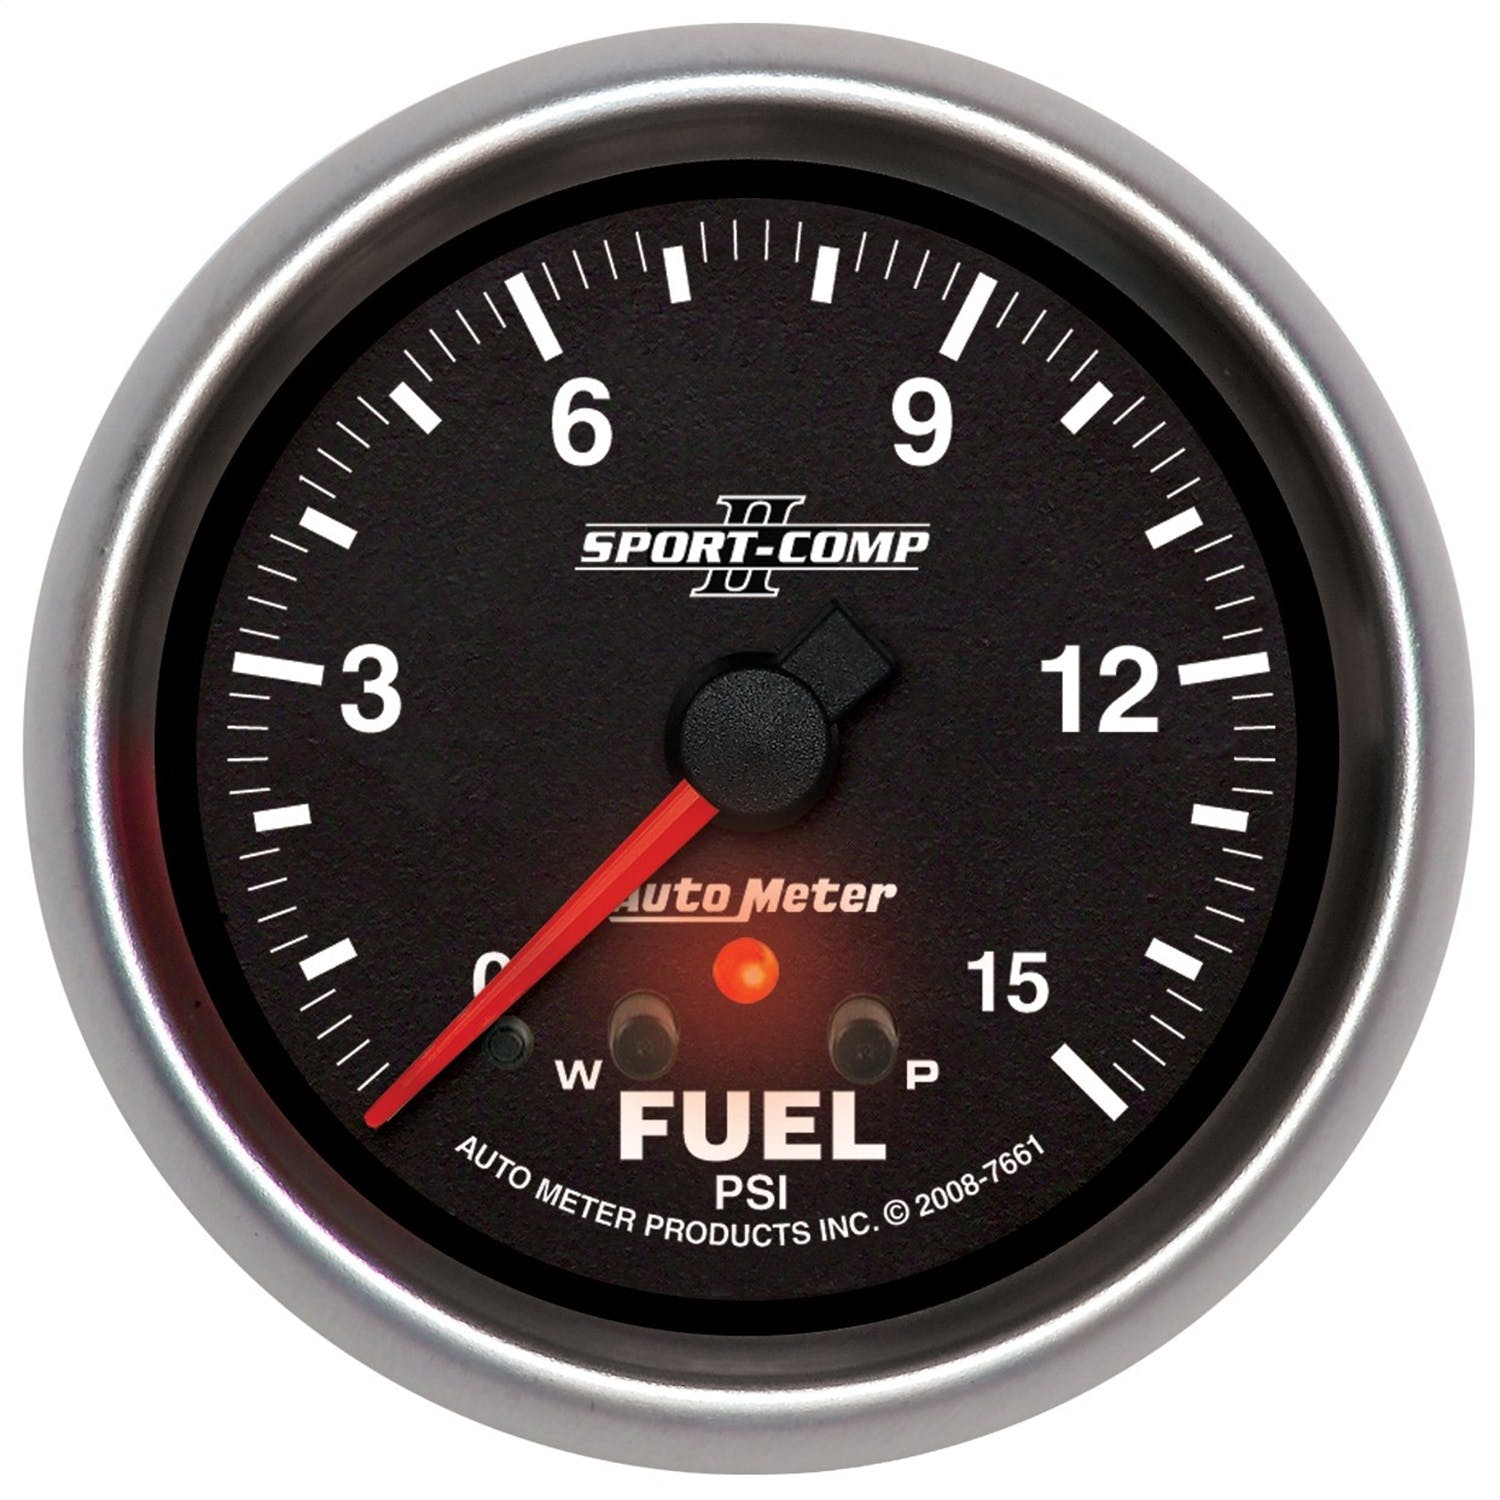 AutoMeter Products 7661 Sport-Comp II Electric Fuel Pressure Gauge 2 5/8 in. 0 - 15 psi w/Peak And